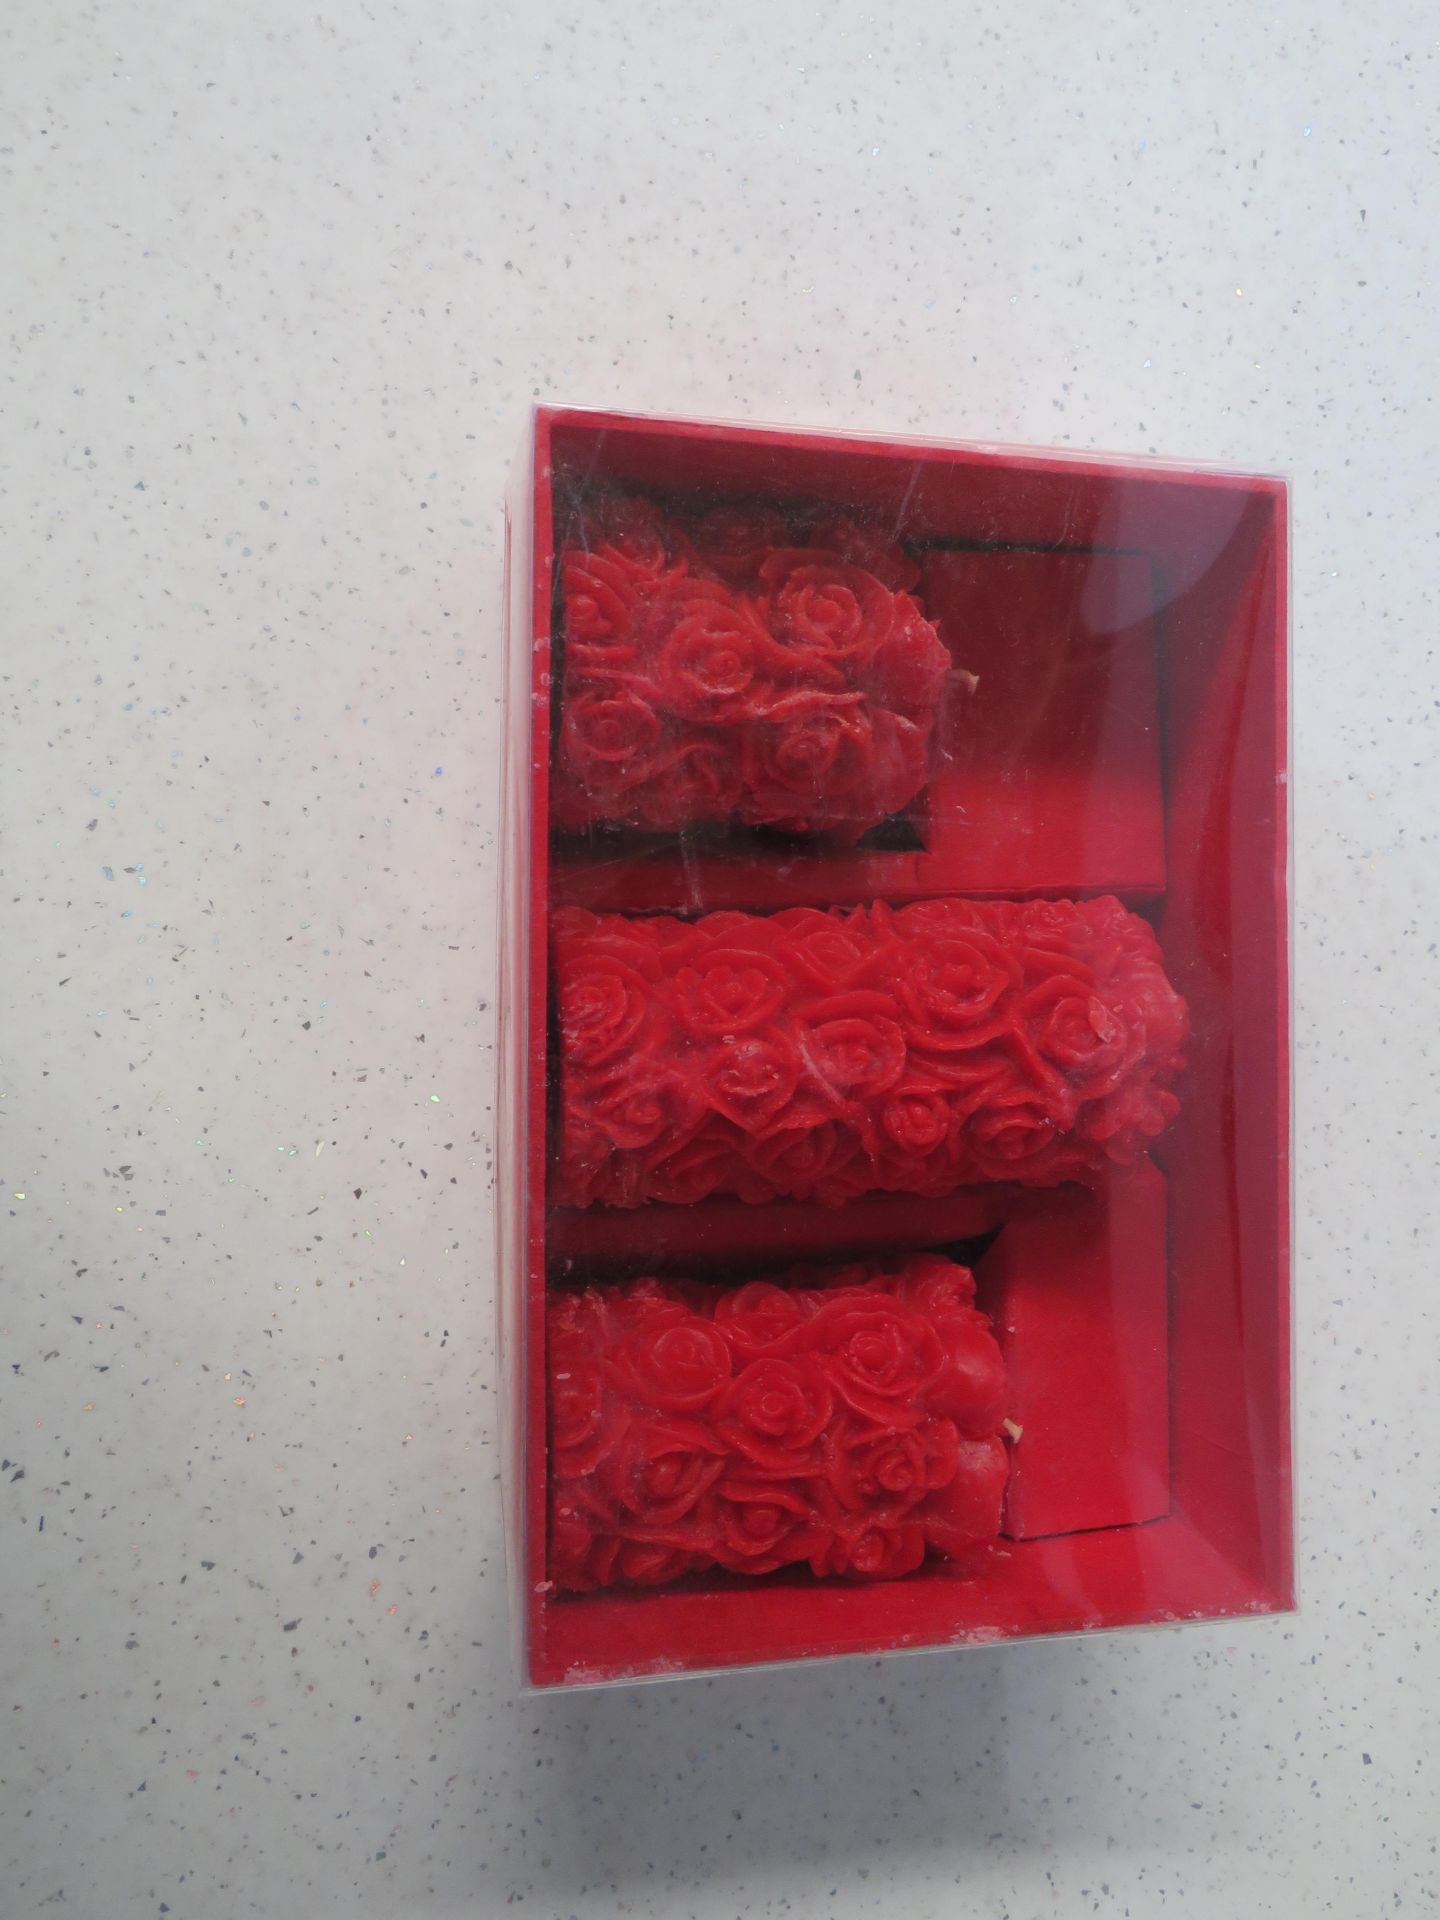 3x Set of 3 Red Rose Pillar Candles - New & Packaged.